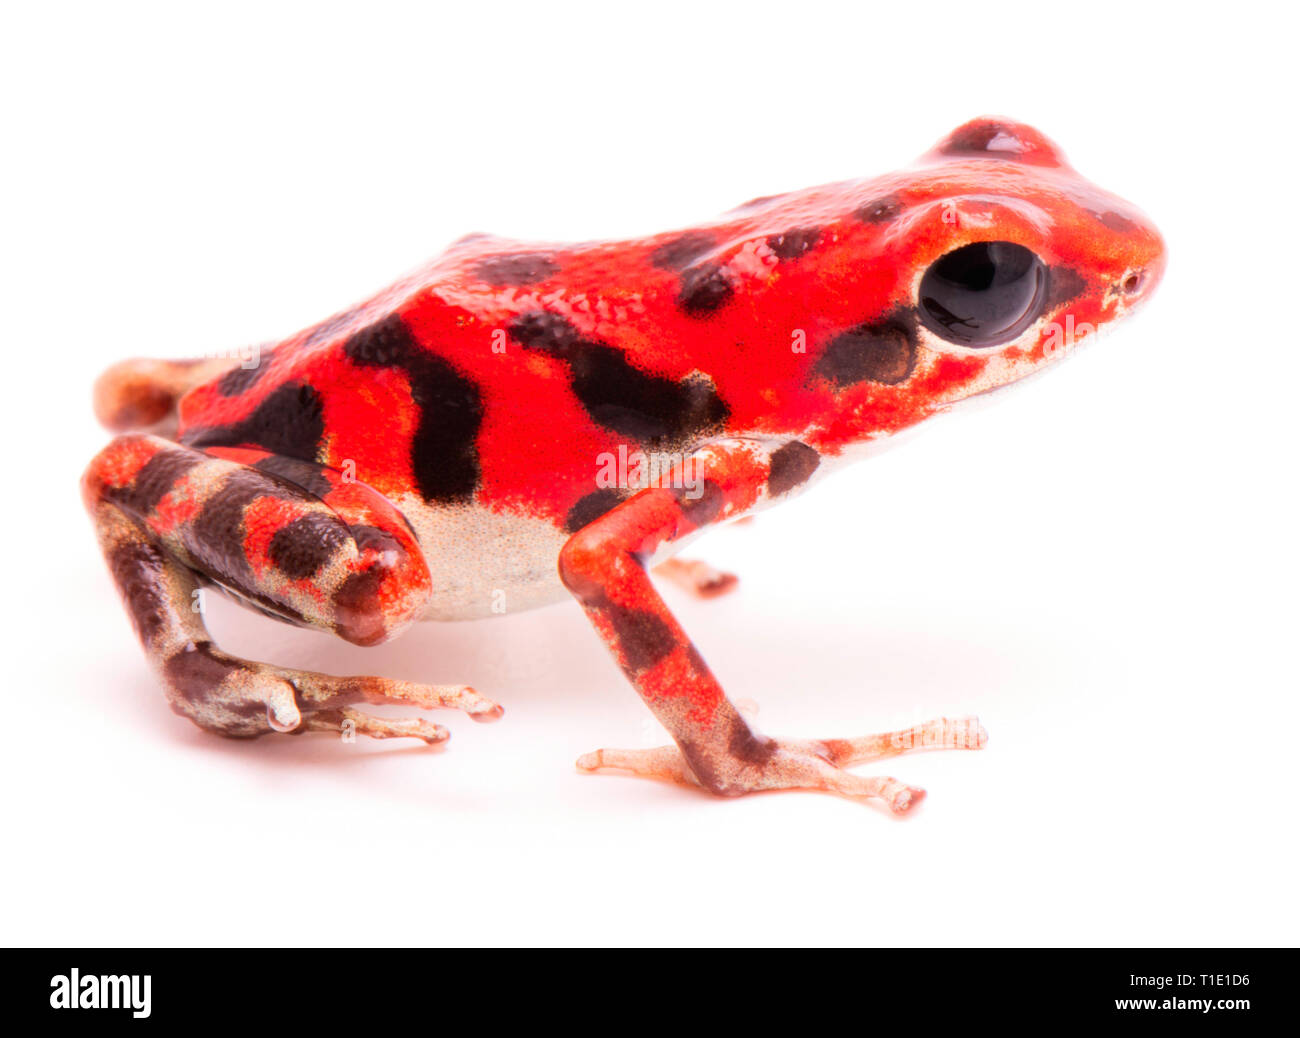 vibrant red poison dart frog. Tropical poisonous rain forest animal, Oophaga pumilio isolated on a white background. Stock Photo